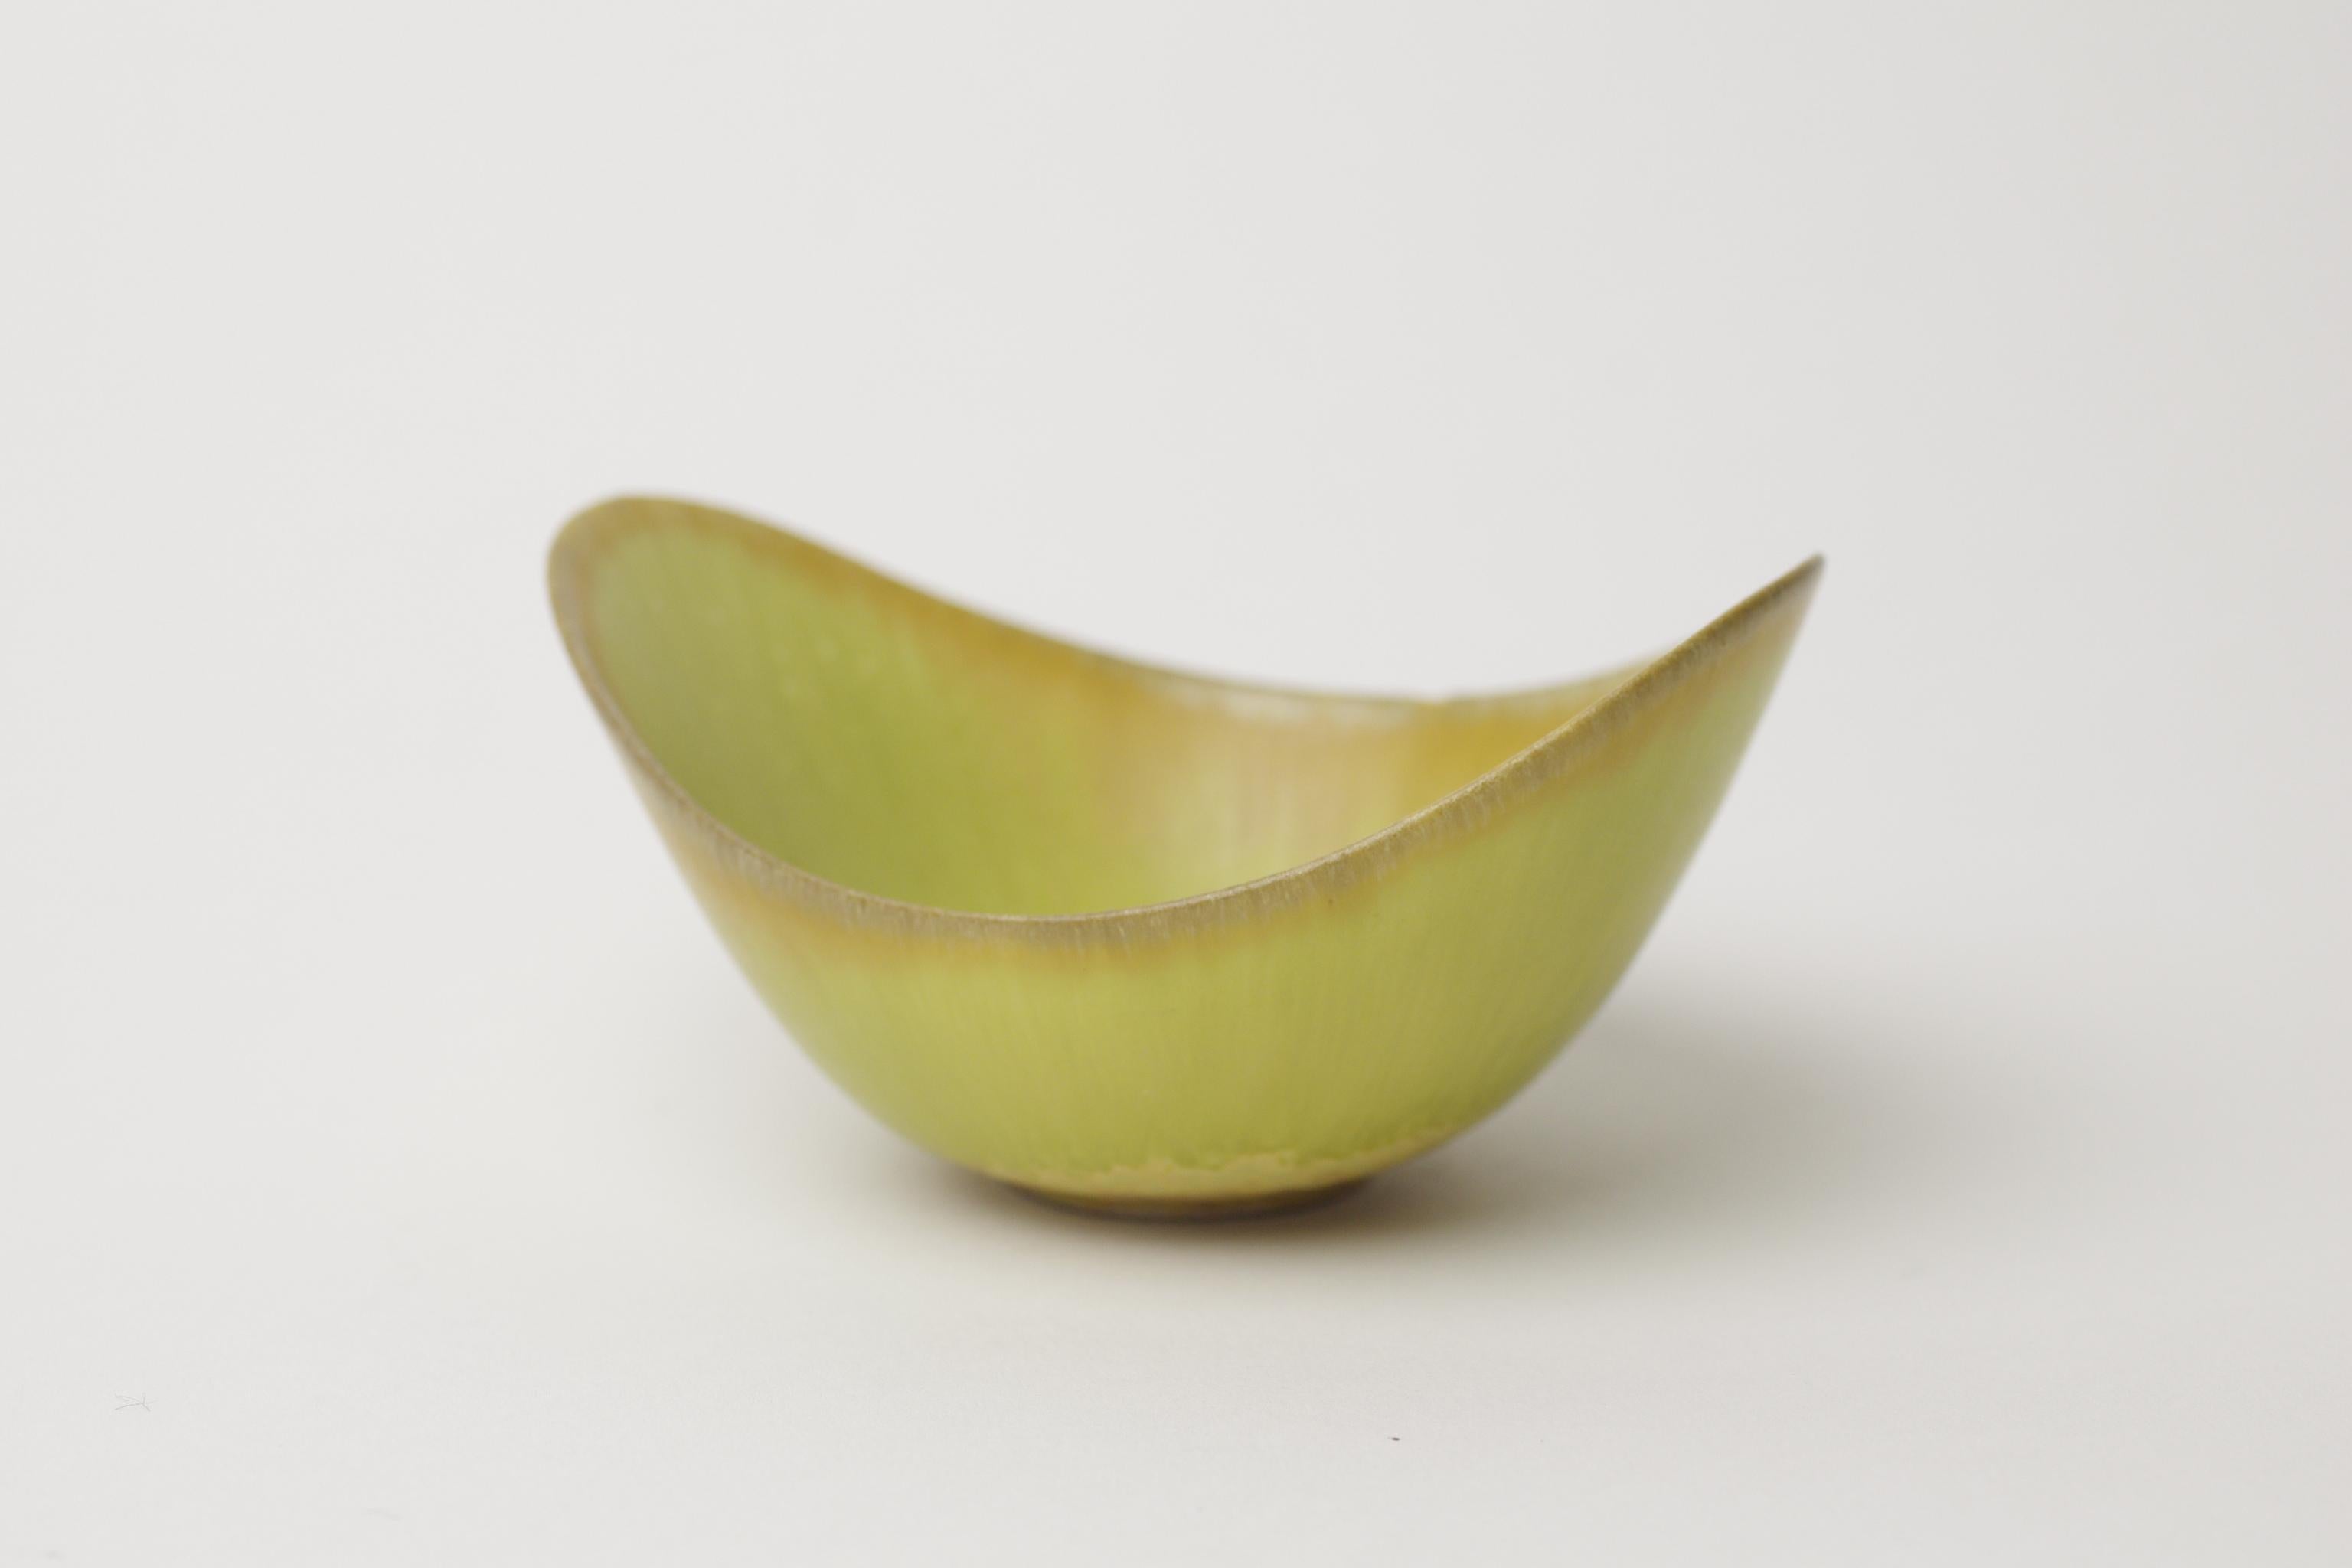 Product Description: 
Gunnar Nylund, one of Sweden's leading ceramic artists, lived and worked all over Scandinavia being involved with Bing & Gröndahl in Denmark, Rörstrand in Sweden and studying in Helsinki. His work is exhibited in many museums